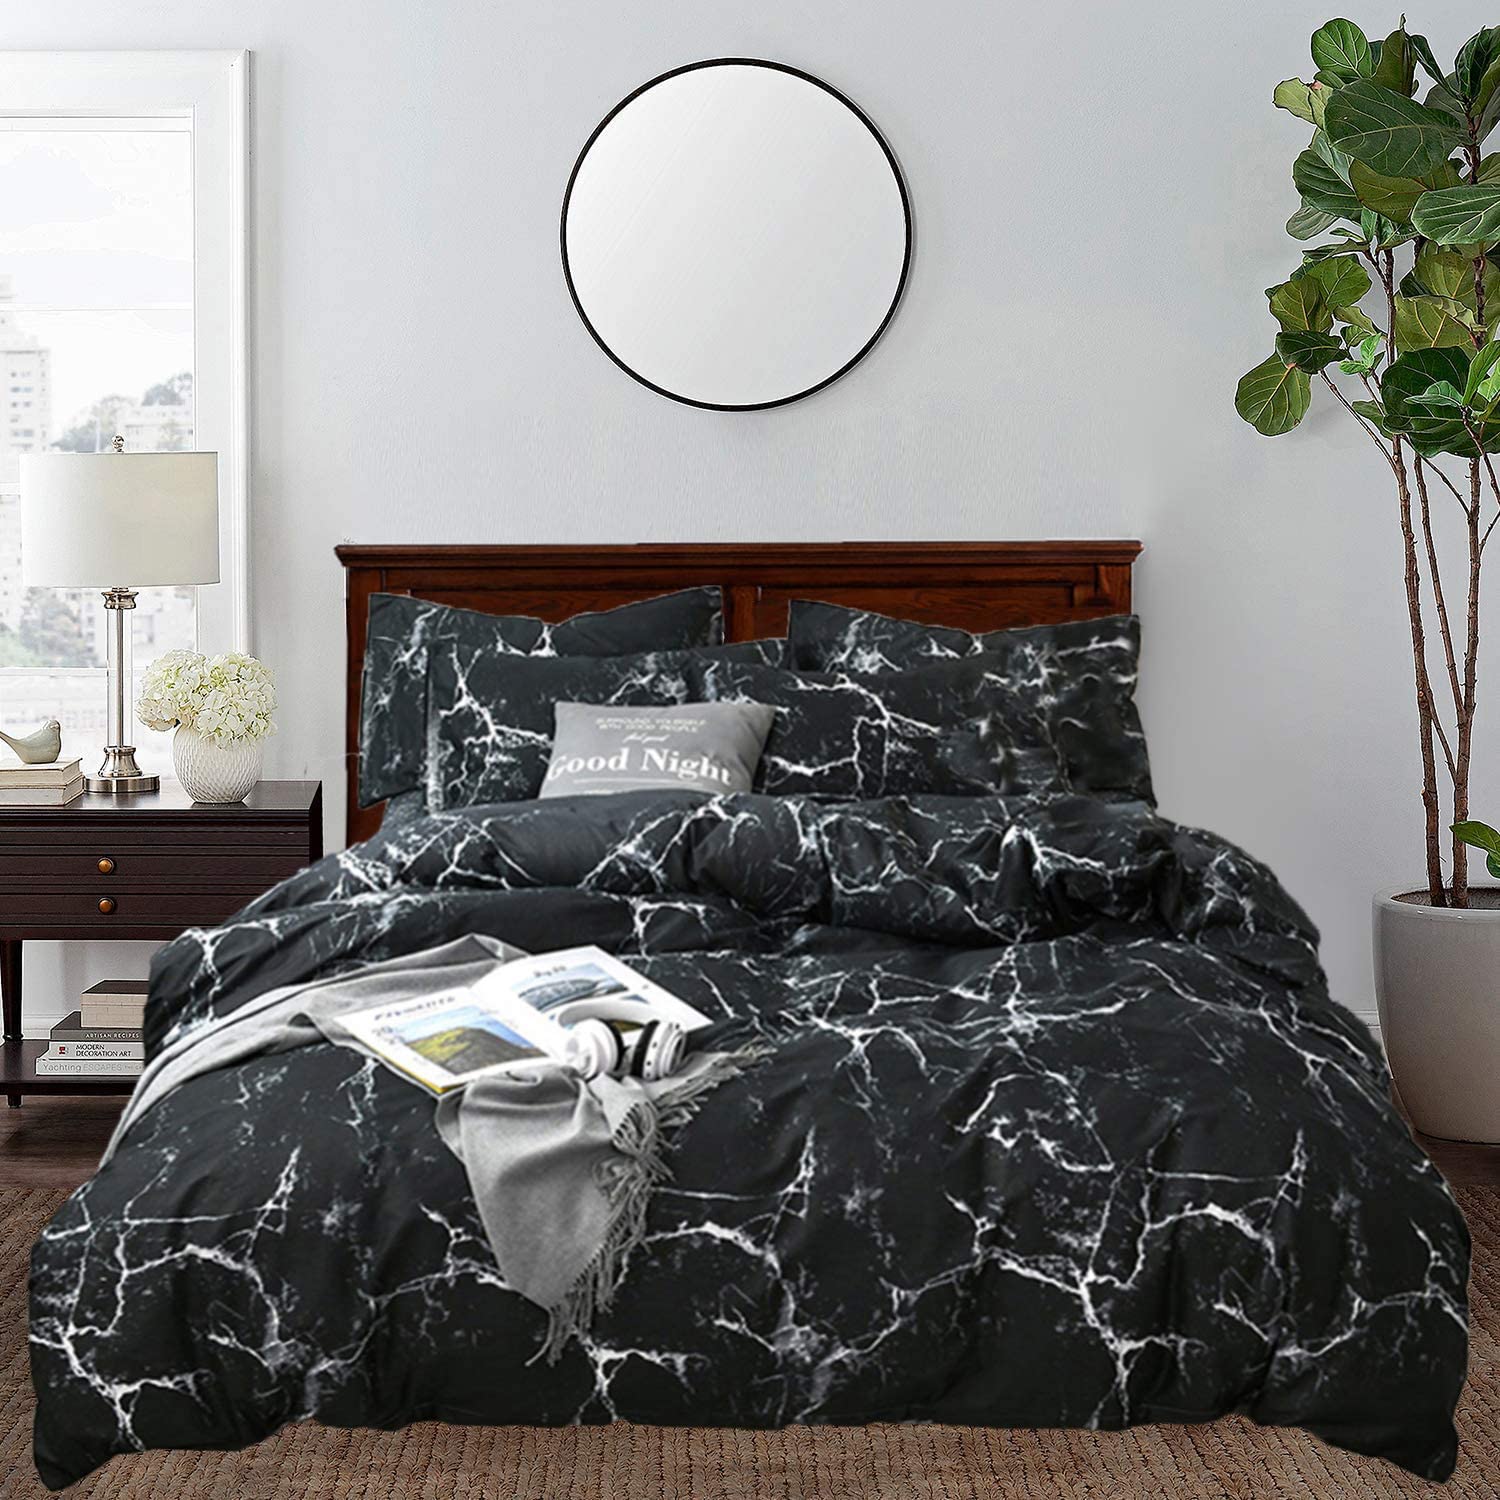 Details about   CLOTHKNOW Aztec Comforter Sets Queen Cotton Black and White Bedding Comforter Fu 